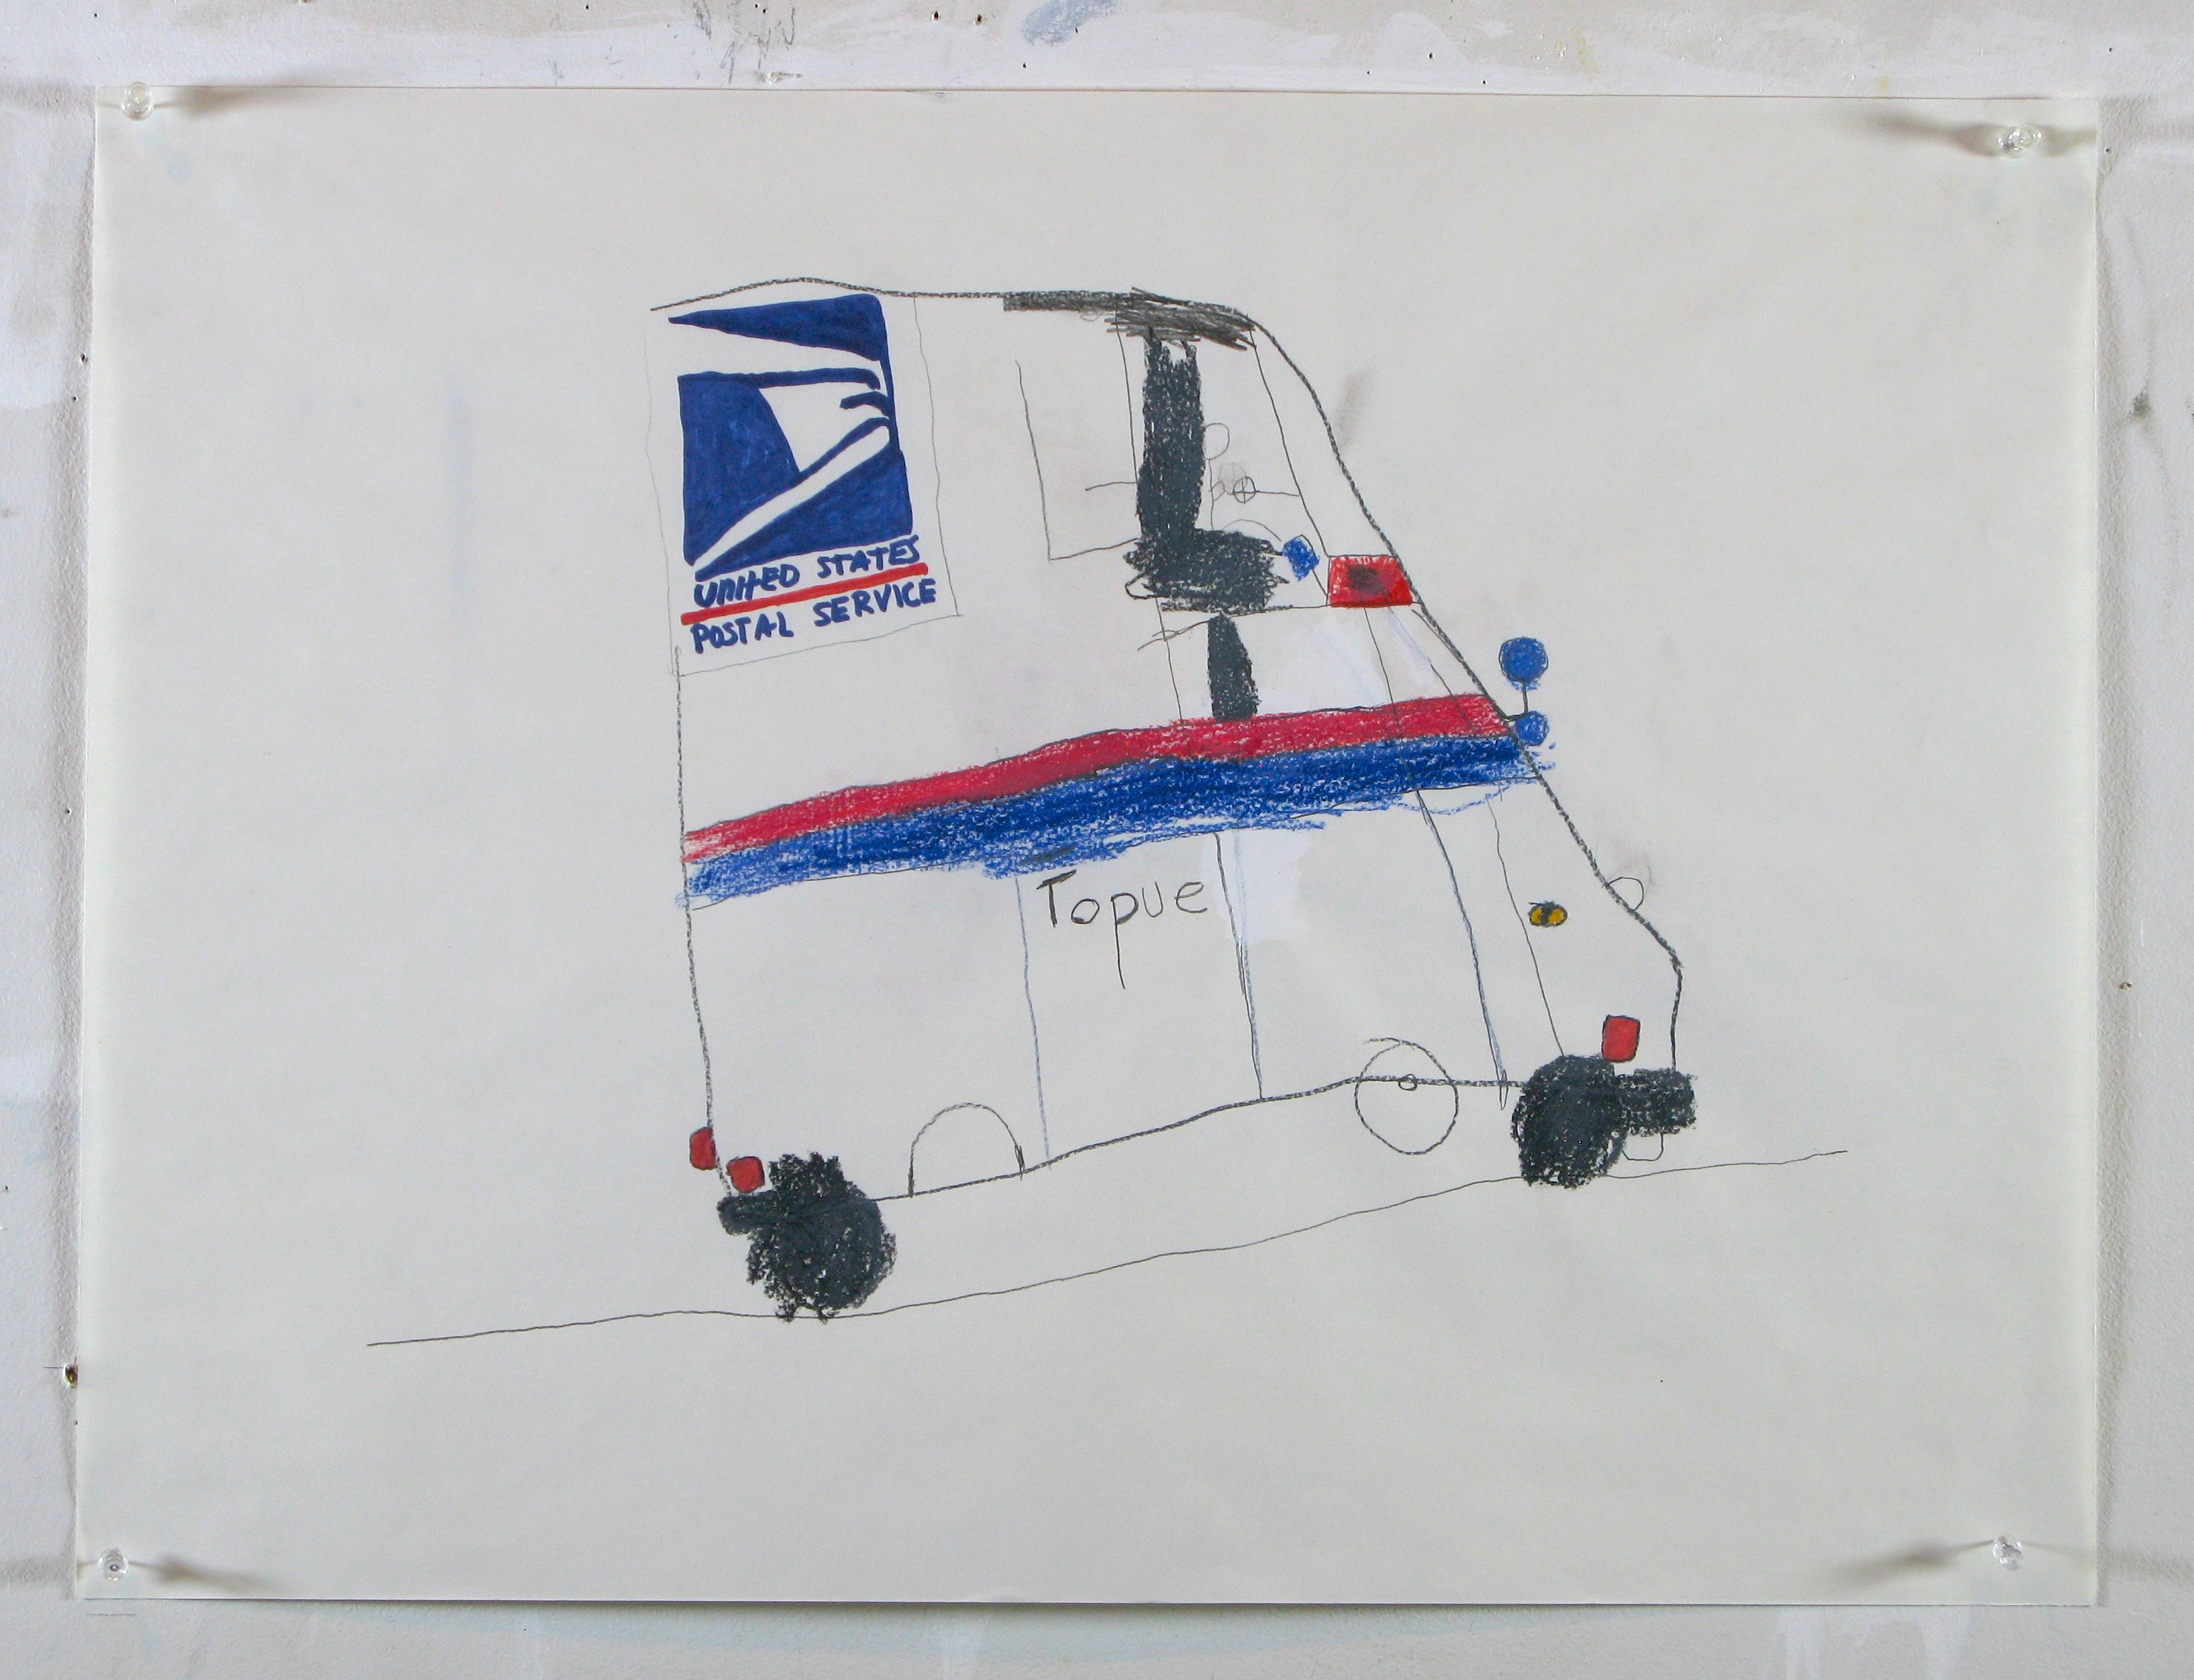 Robert_Nava-17_Mail_Truck_2_2015_Crayon_marker_and_pencil_on_paper